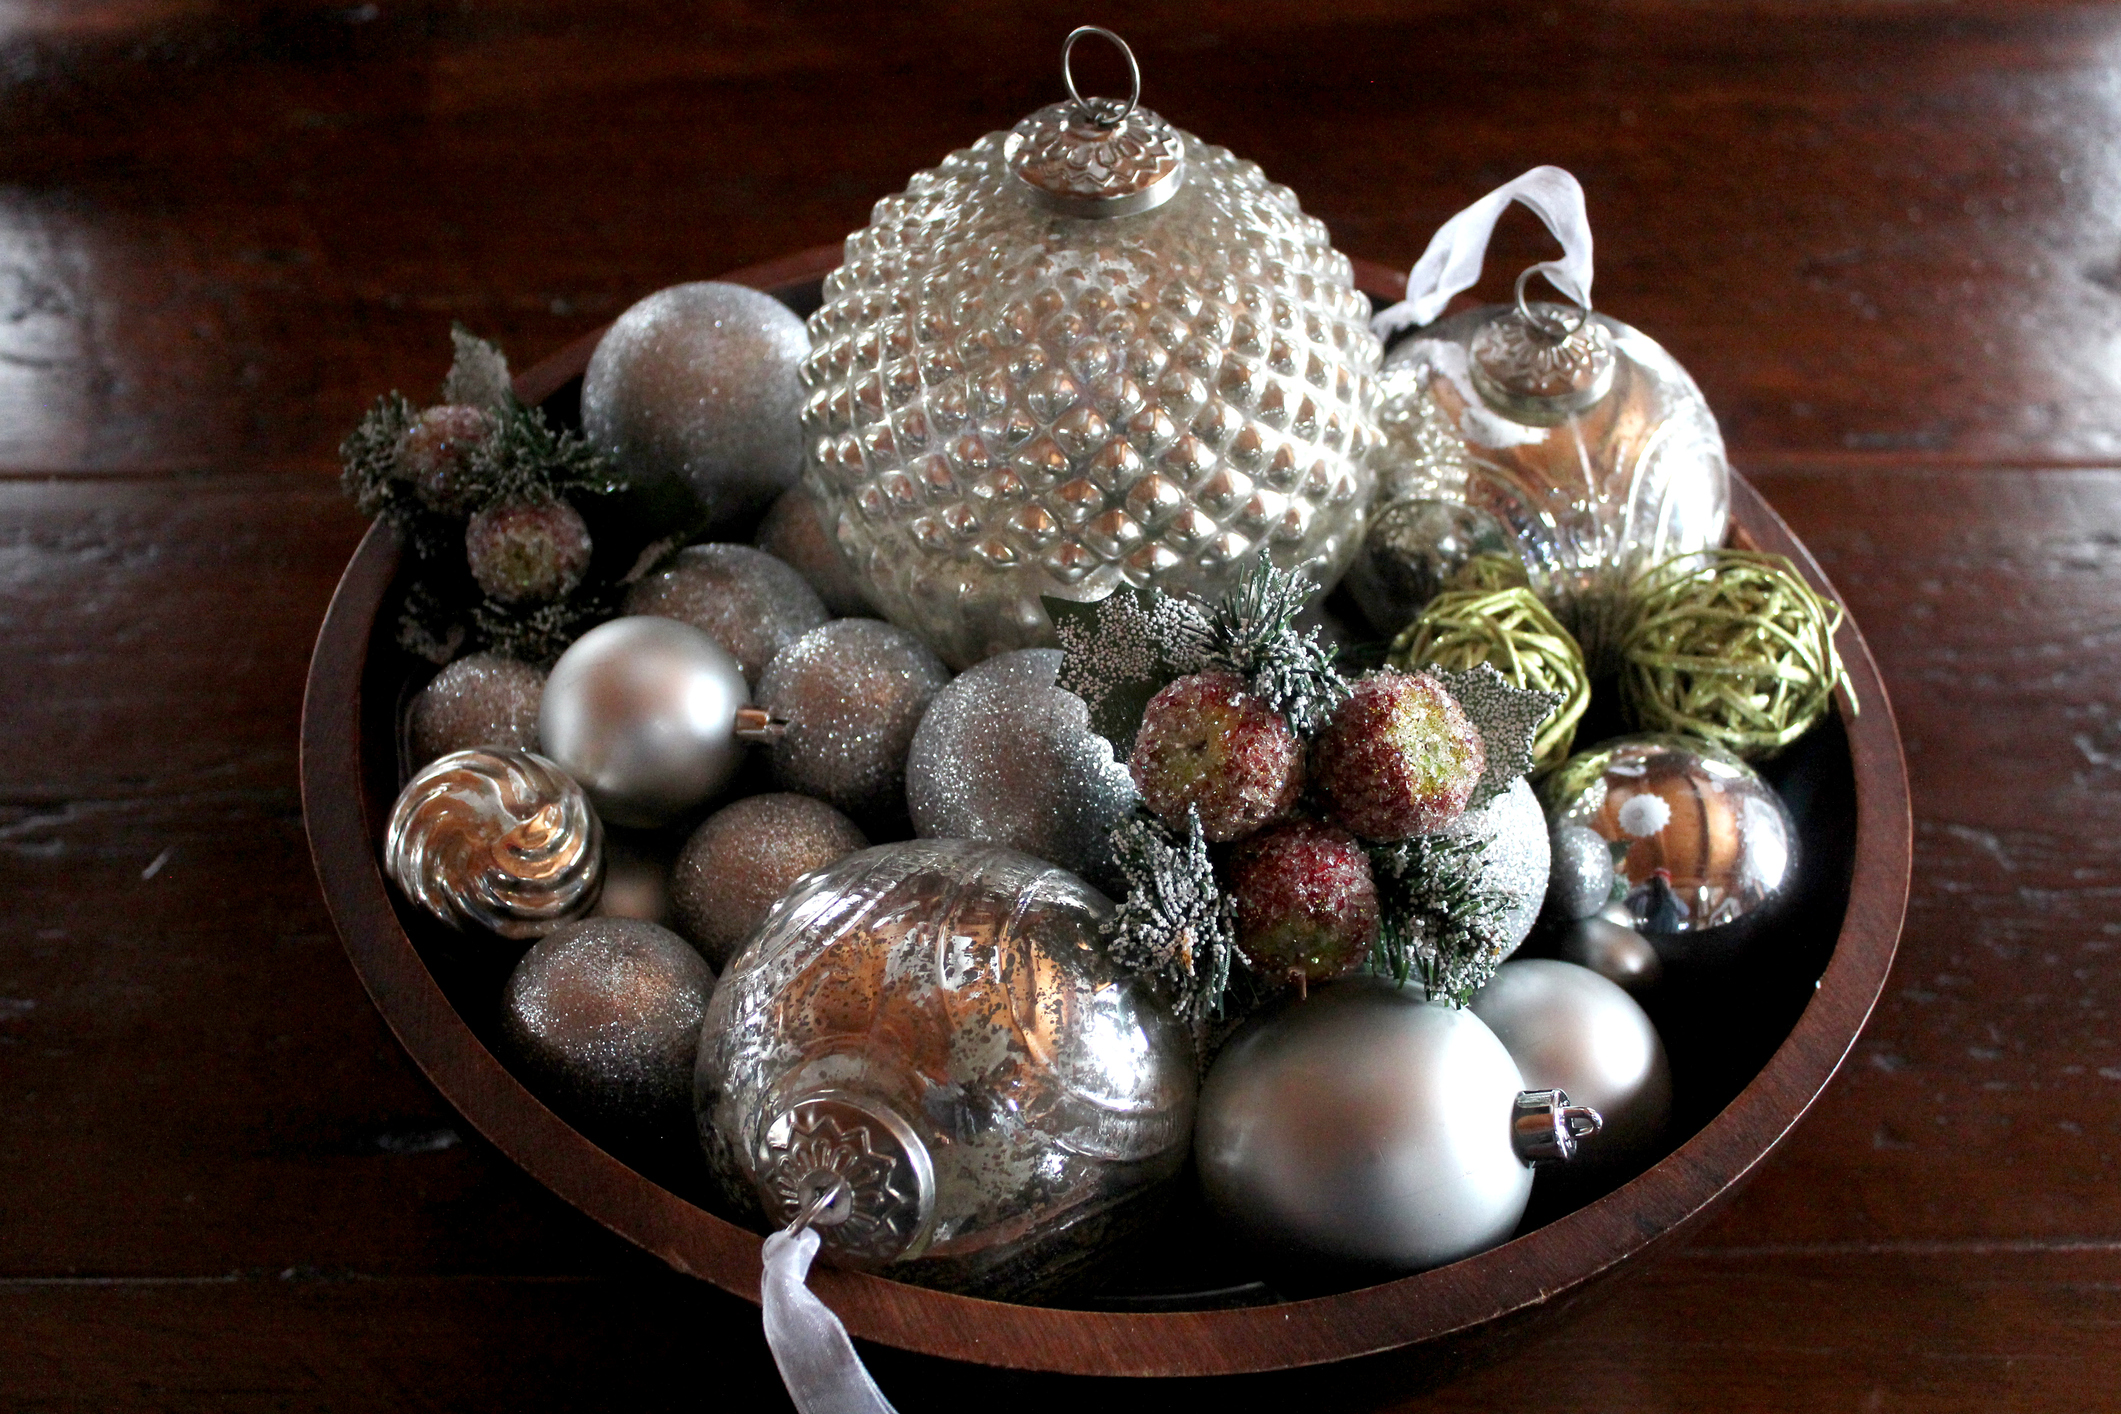 Ornaments in a Vintage Bowl